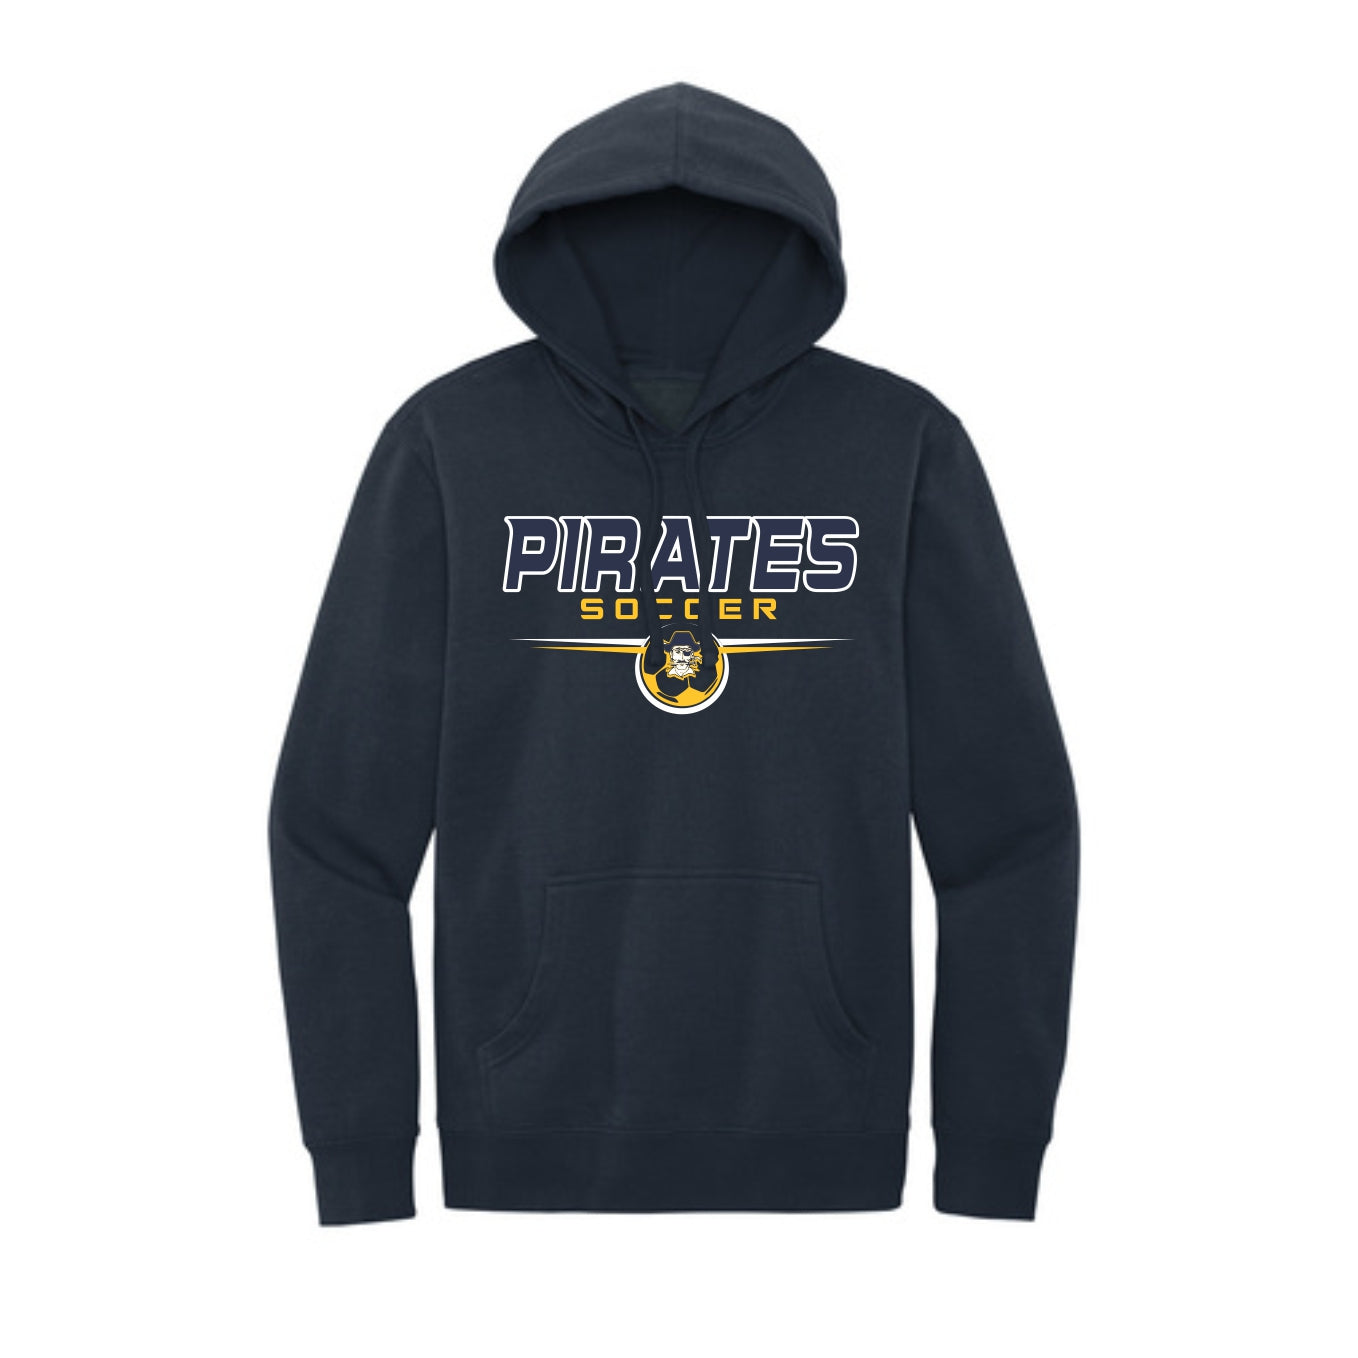 PIrate Boys Soccer -- Fleece Hoodie -- Adult/Youth